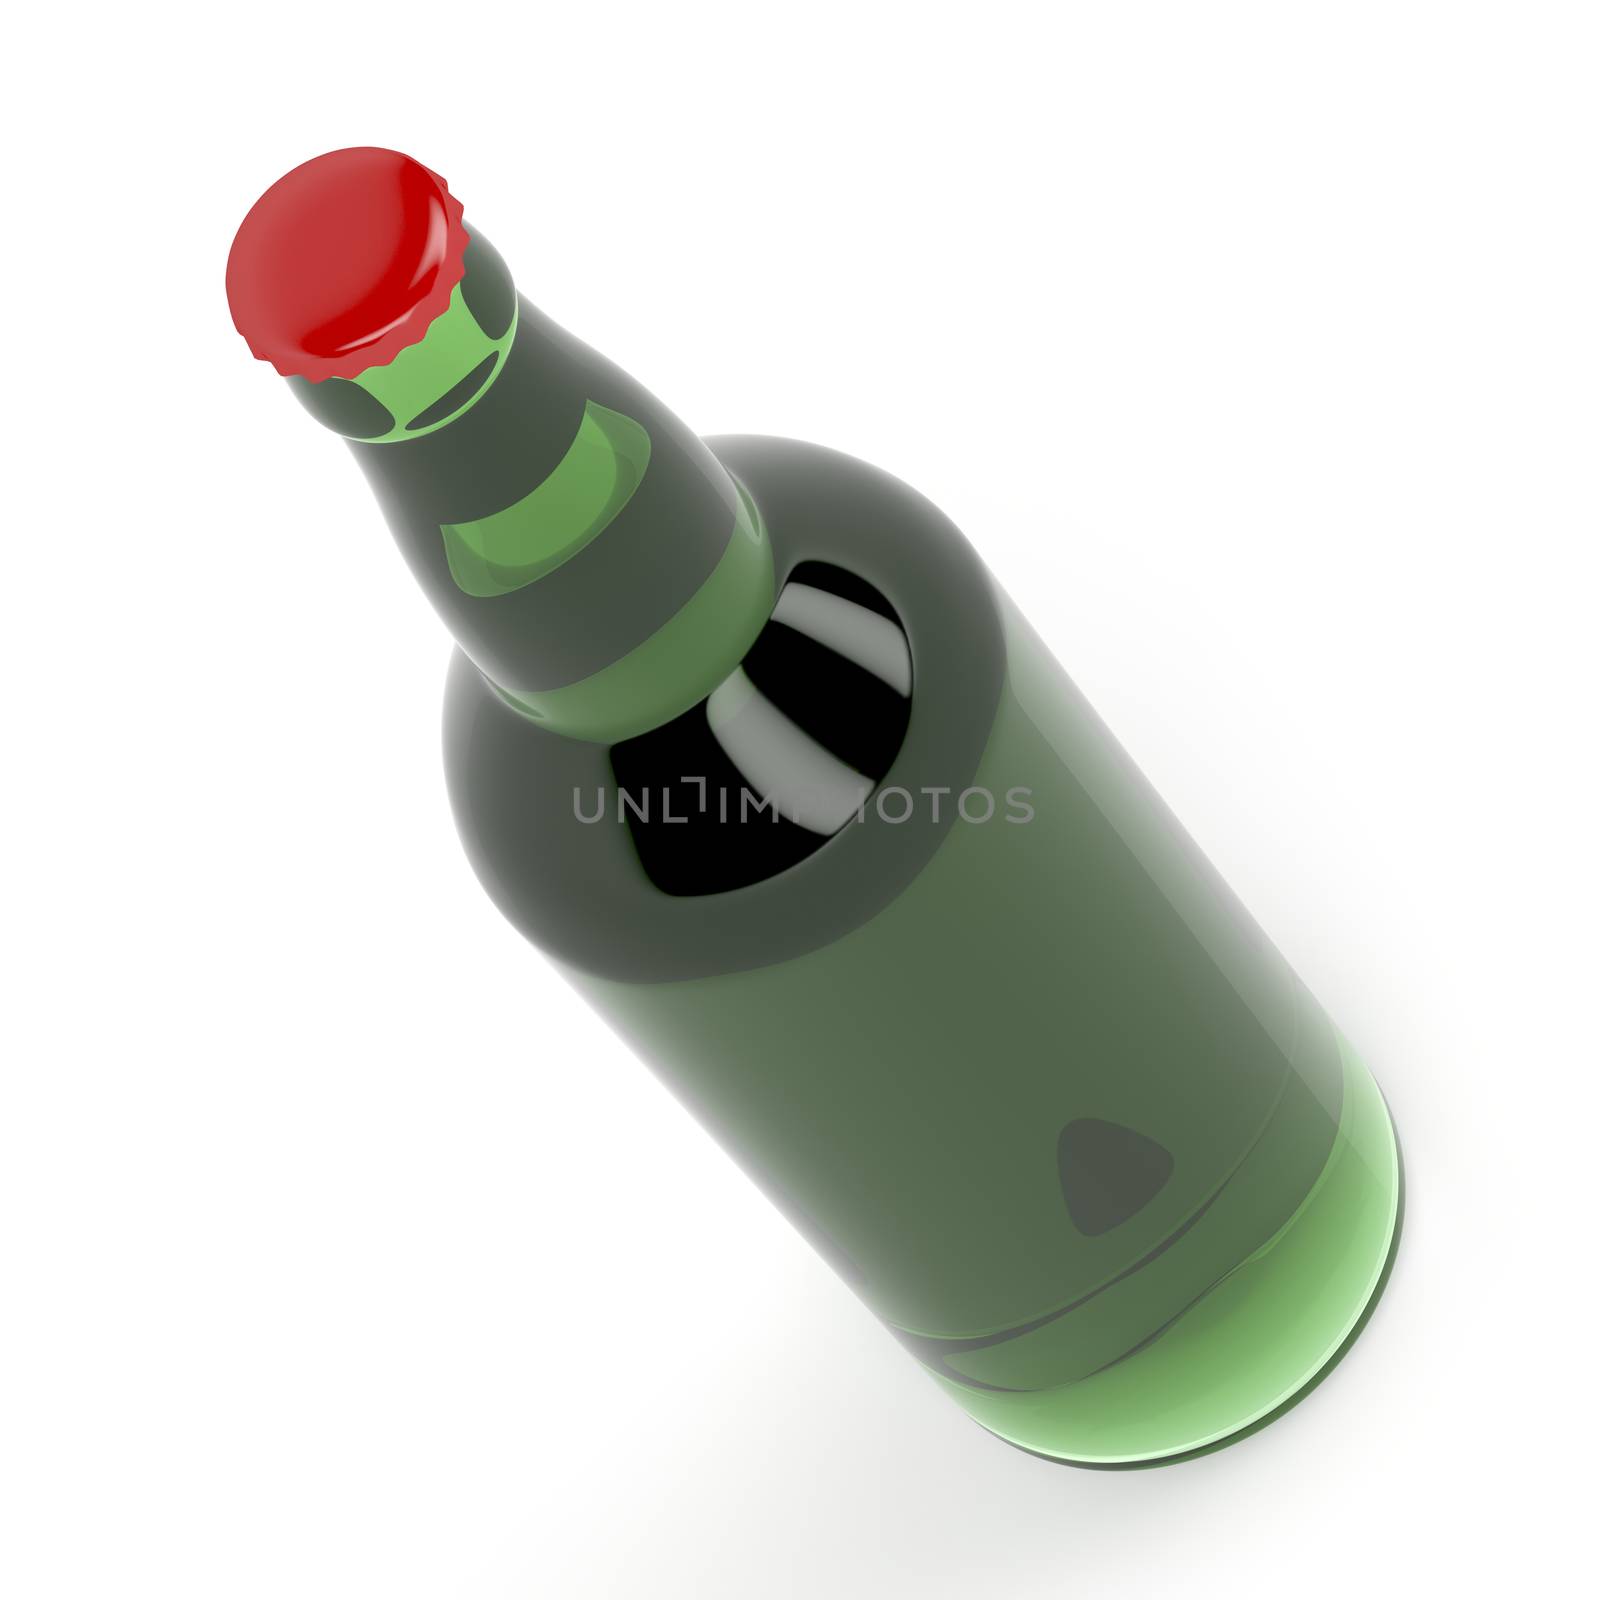 Beer bottle by magraphics